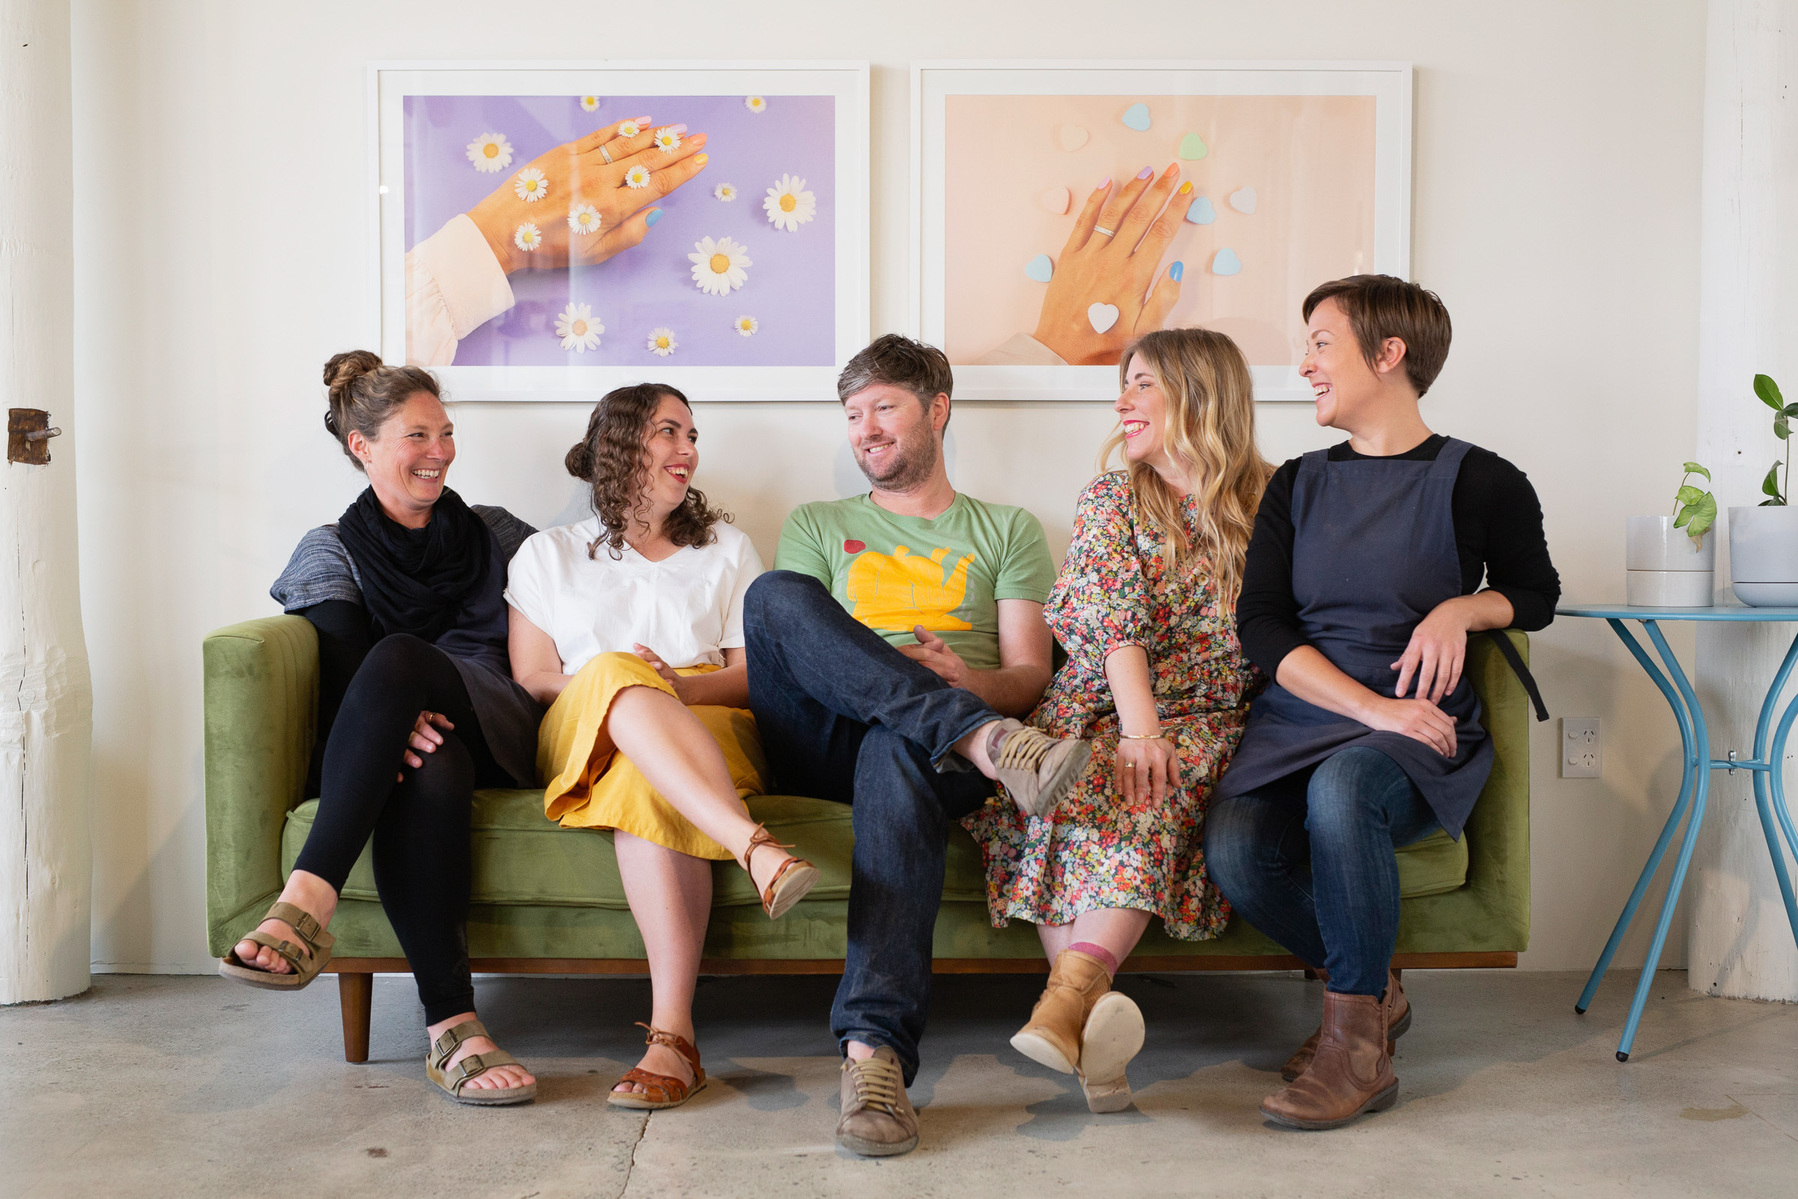 Five colleagues sit on a green sofa in their workspace, they look relaxed and are smiling at one another